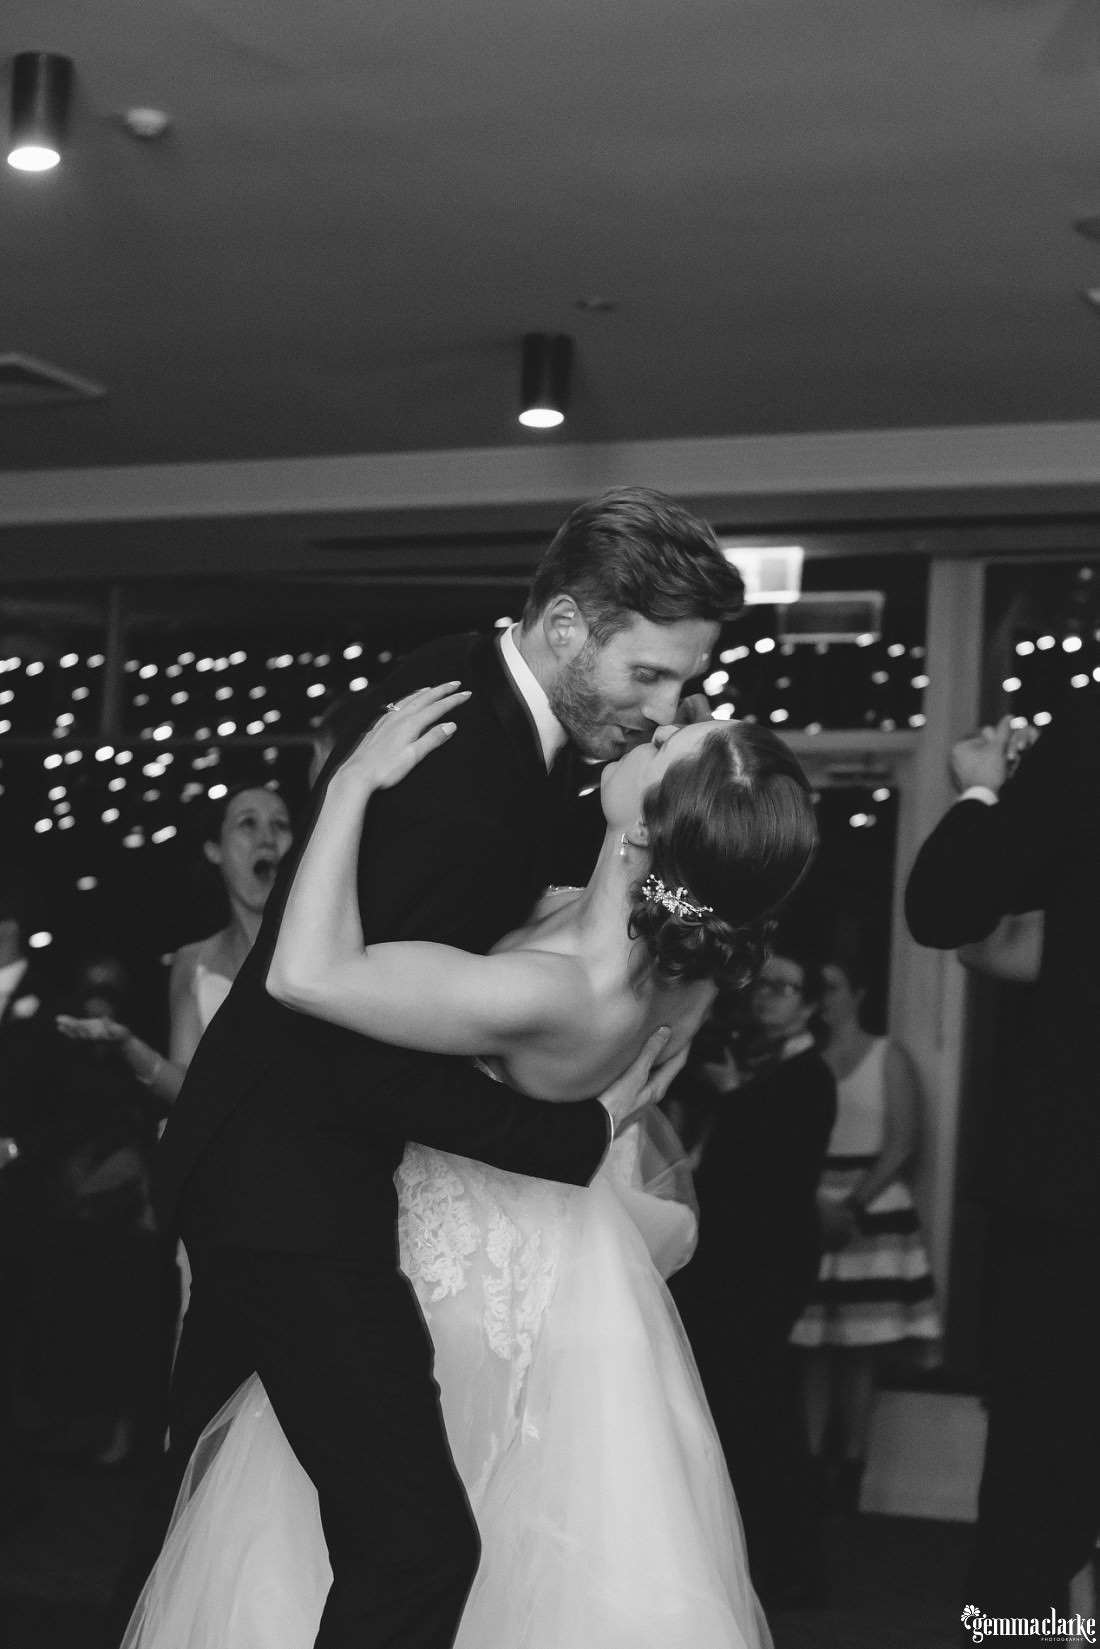 A groom dipping his bride during their first dance